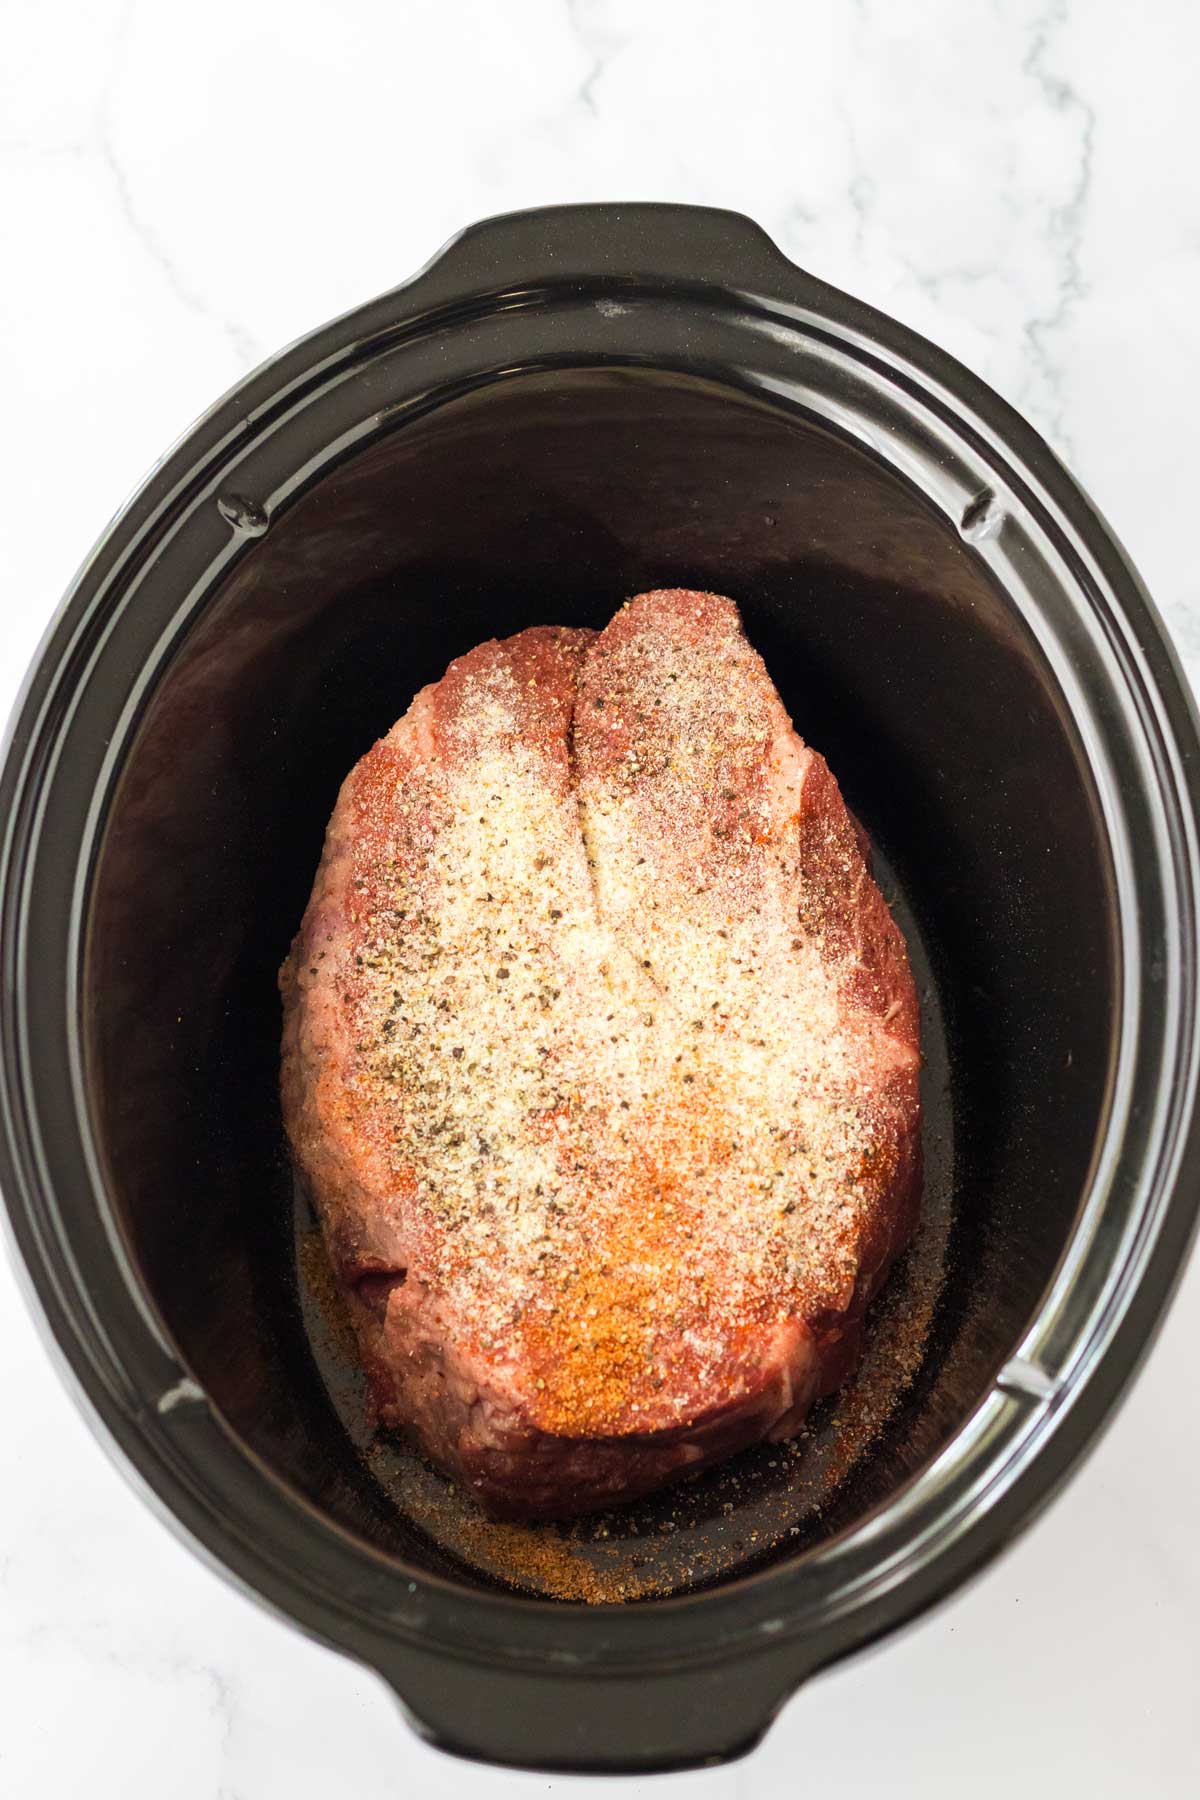 Seasoning the meat for Slow Cooker BBQ Beef Sandwiches